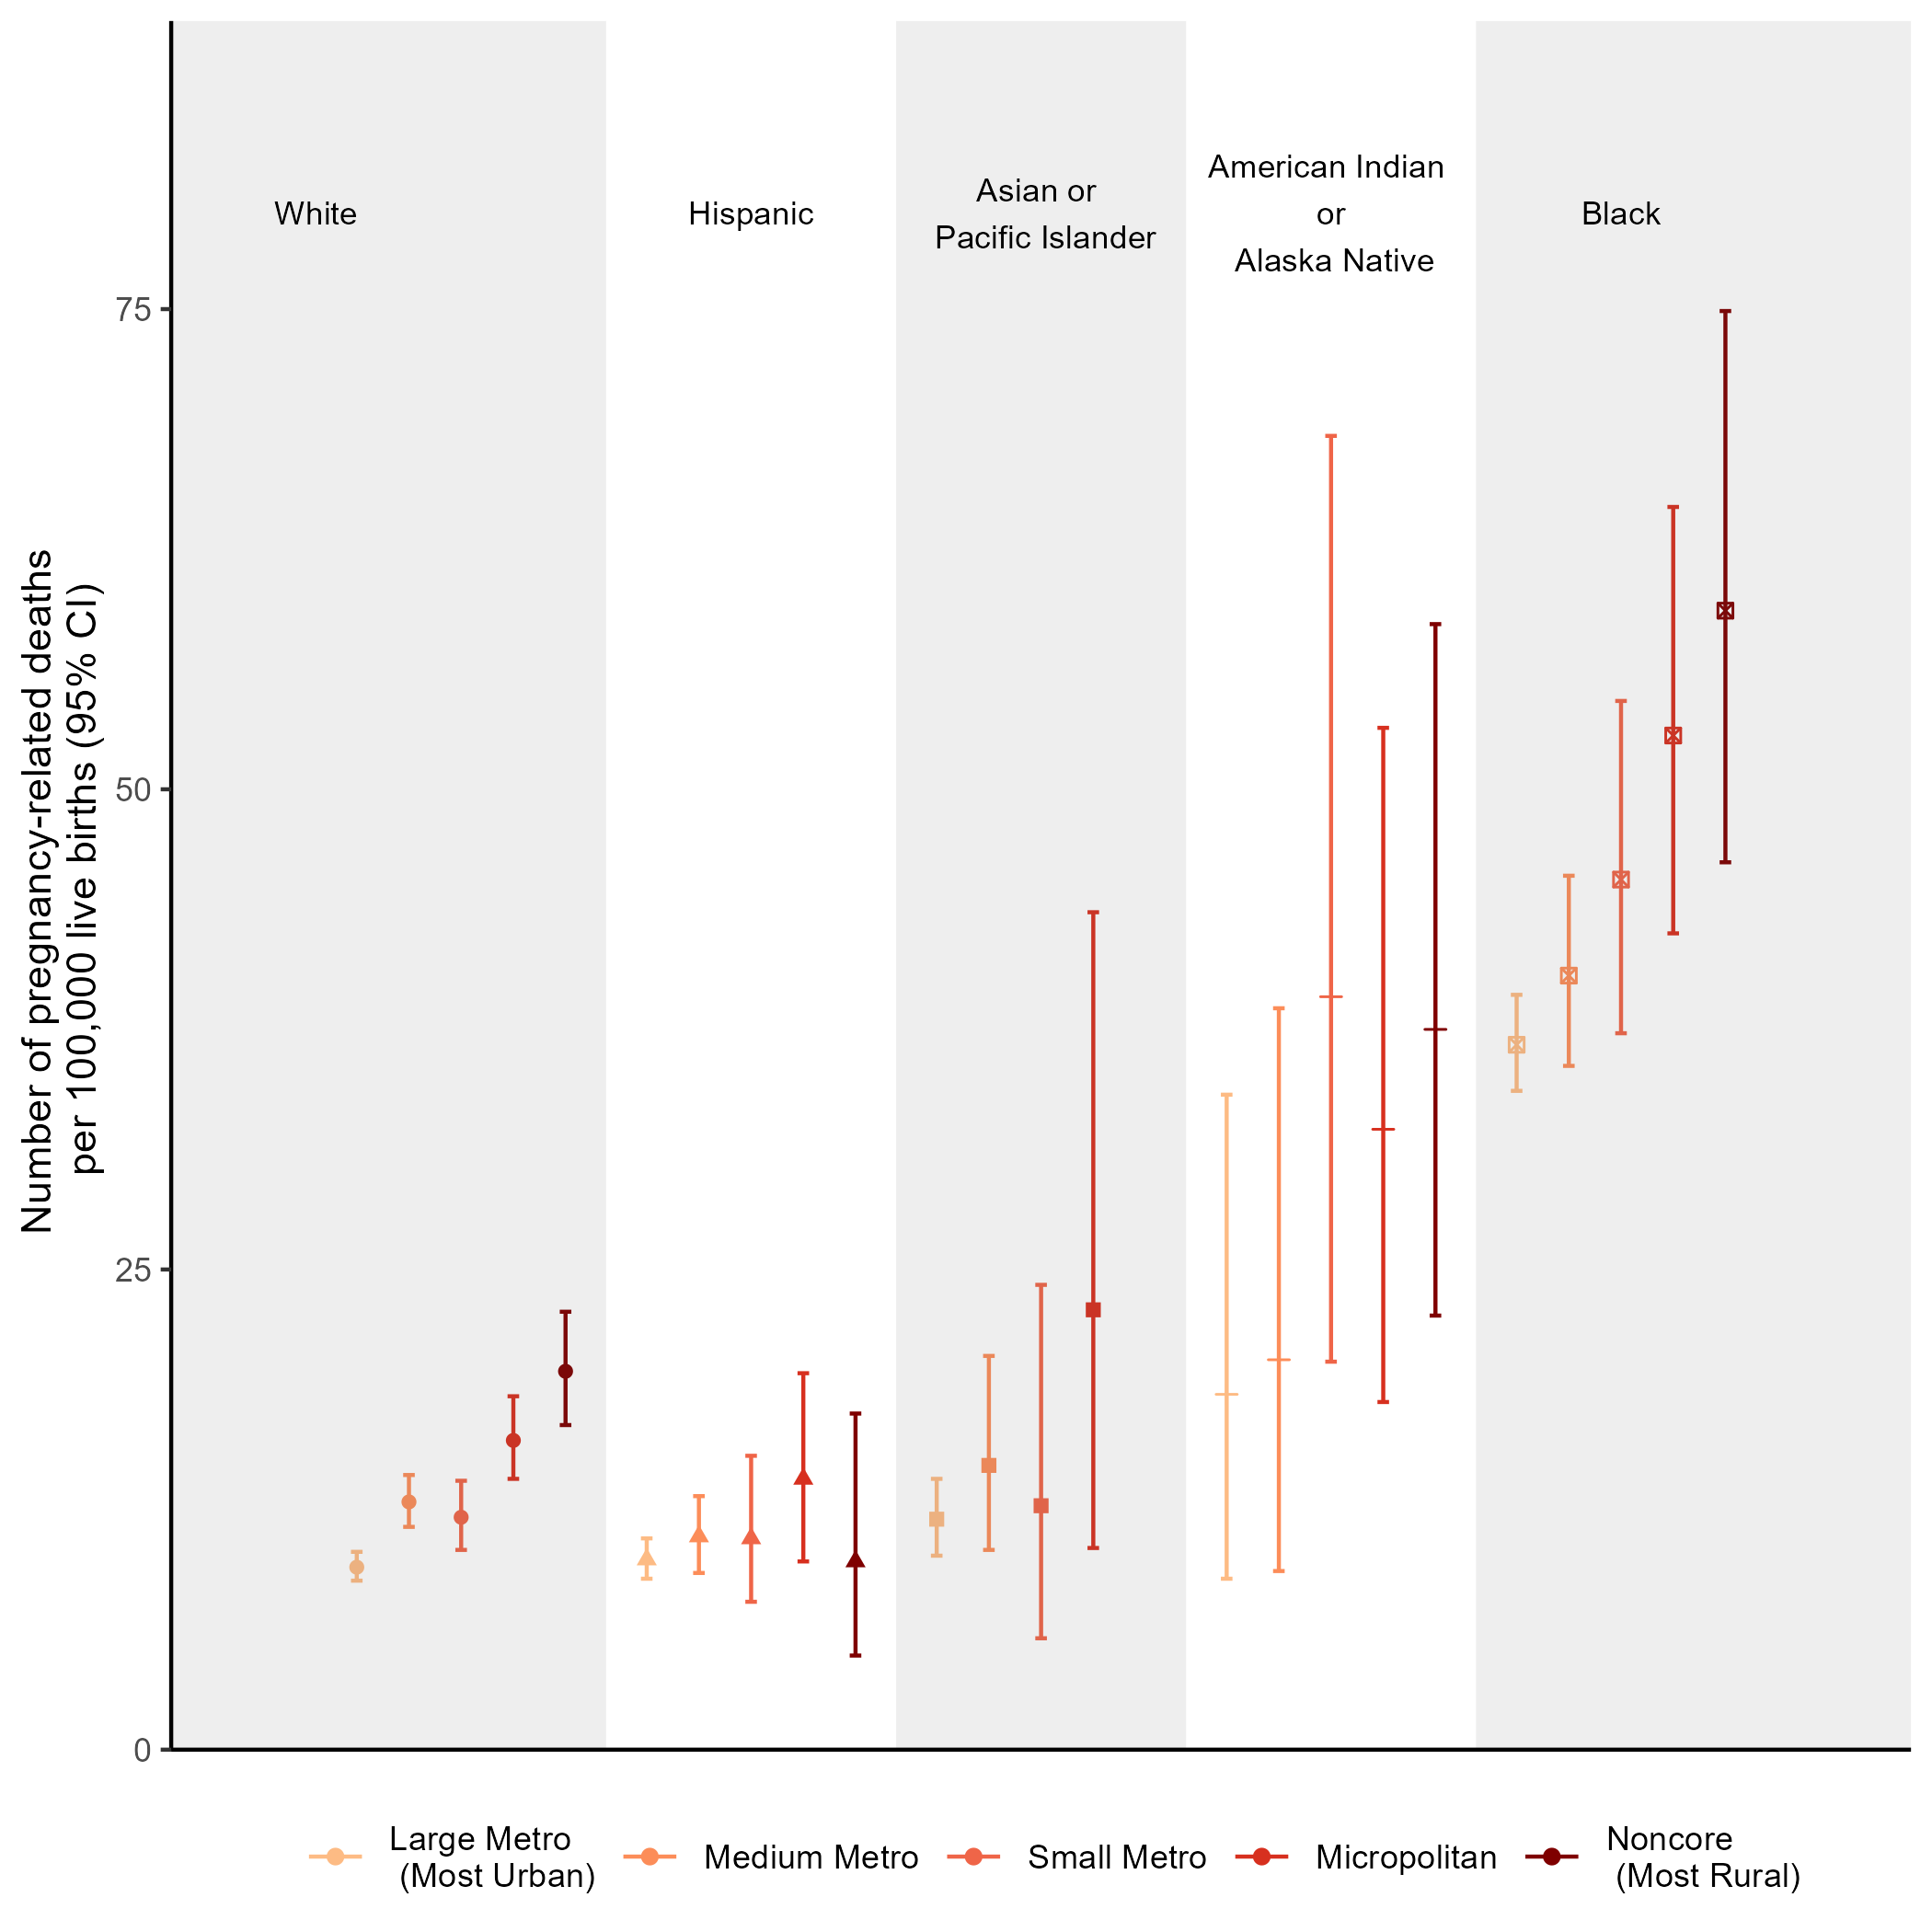 Plot displaying the point estimates and 95% confidence intervals for the number of pregnancy-related deaths per 100,000 births for each race and ethnicity group and each urban-rural categorization. White and Hispanic have the lowest point estimates and shortest confidence intervals. American Indian or Alaska Native and Black have the highest point estimates and the widest confidence intervals.